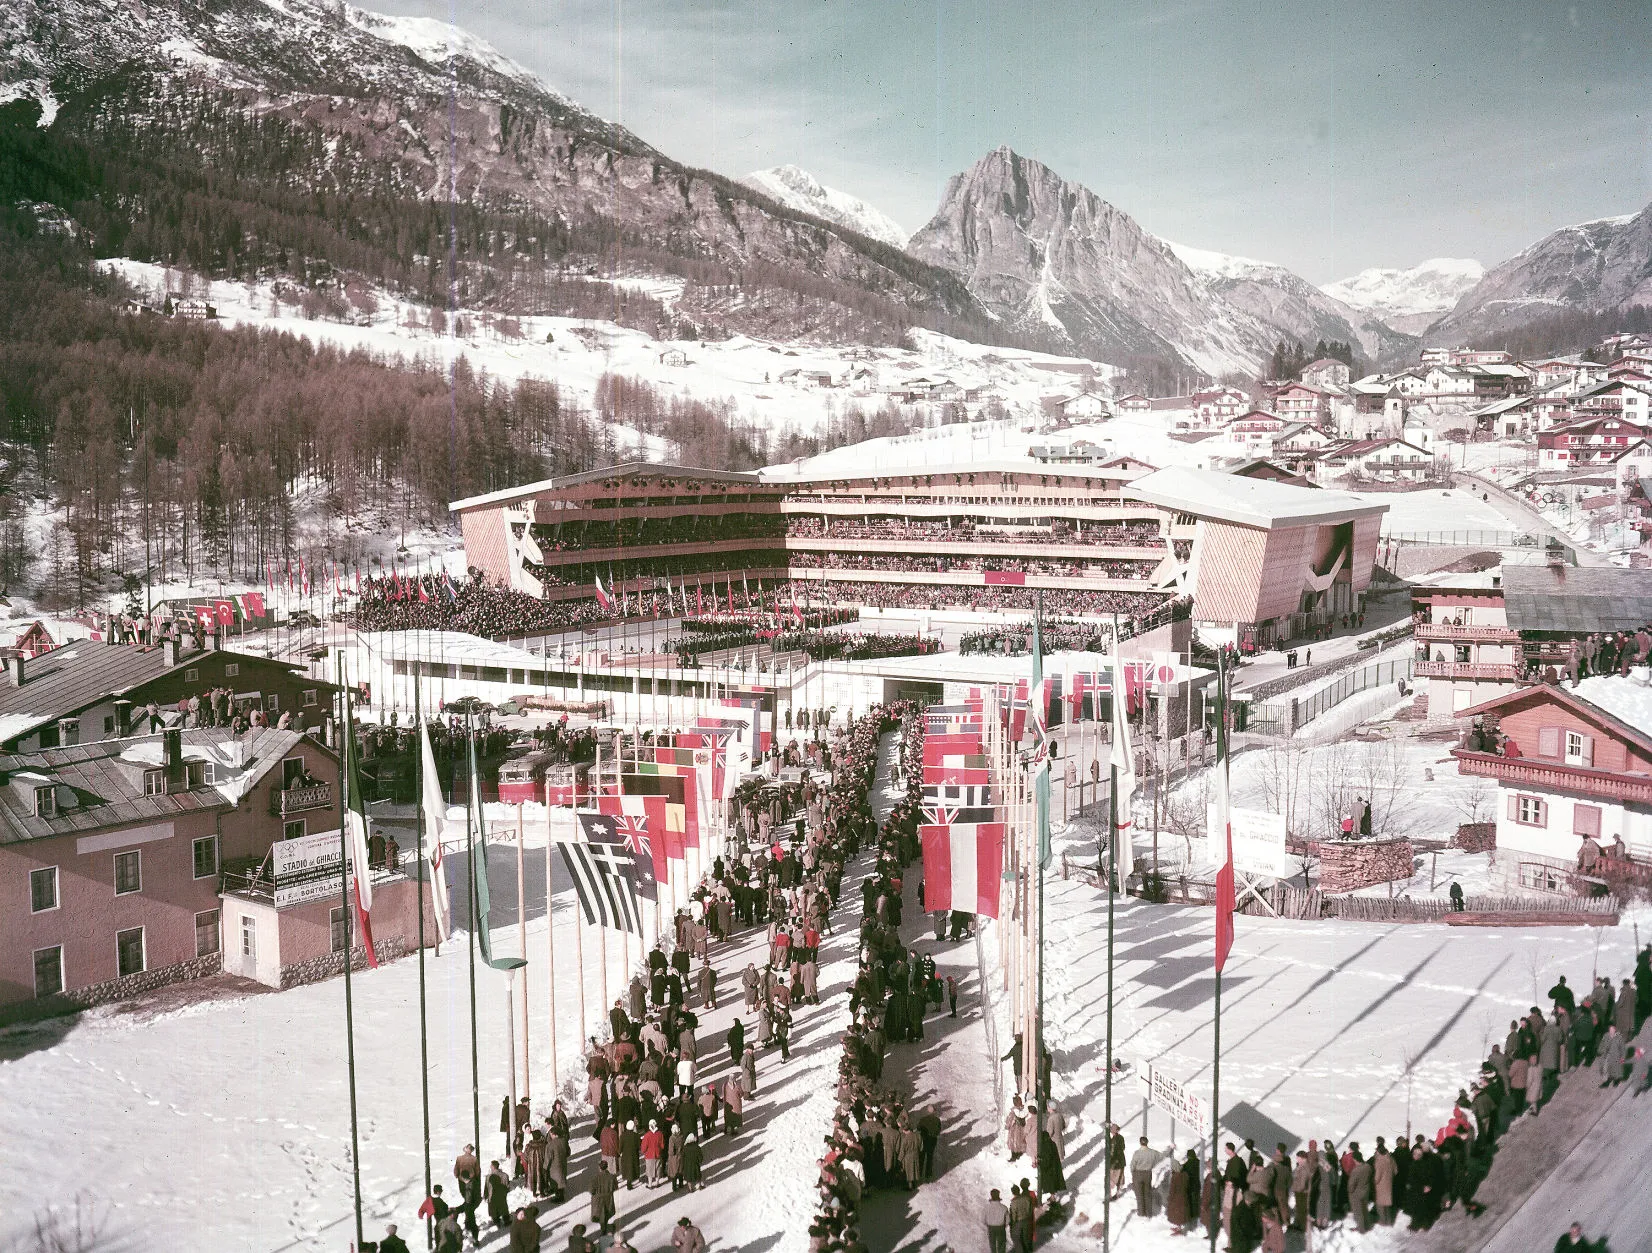 The Stadio olimpico del ghiaccio hosted the Opening and Closing Ceremonies of the 1956 Winter Olympic Games in Cortina d'Ampezzo ©Getty Images